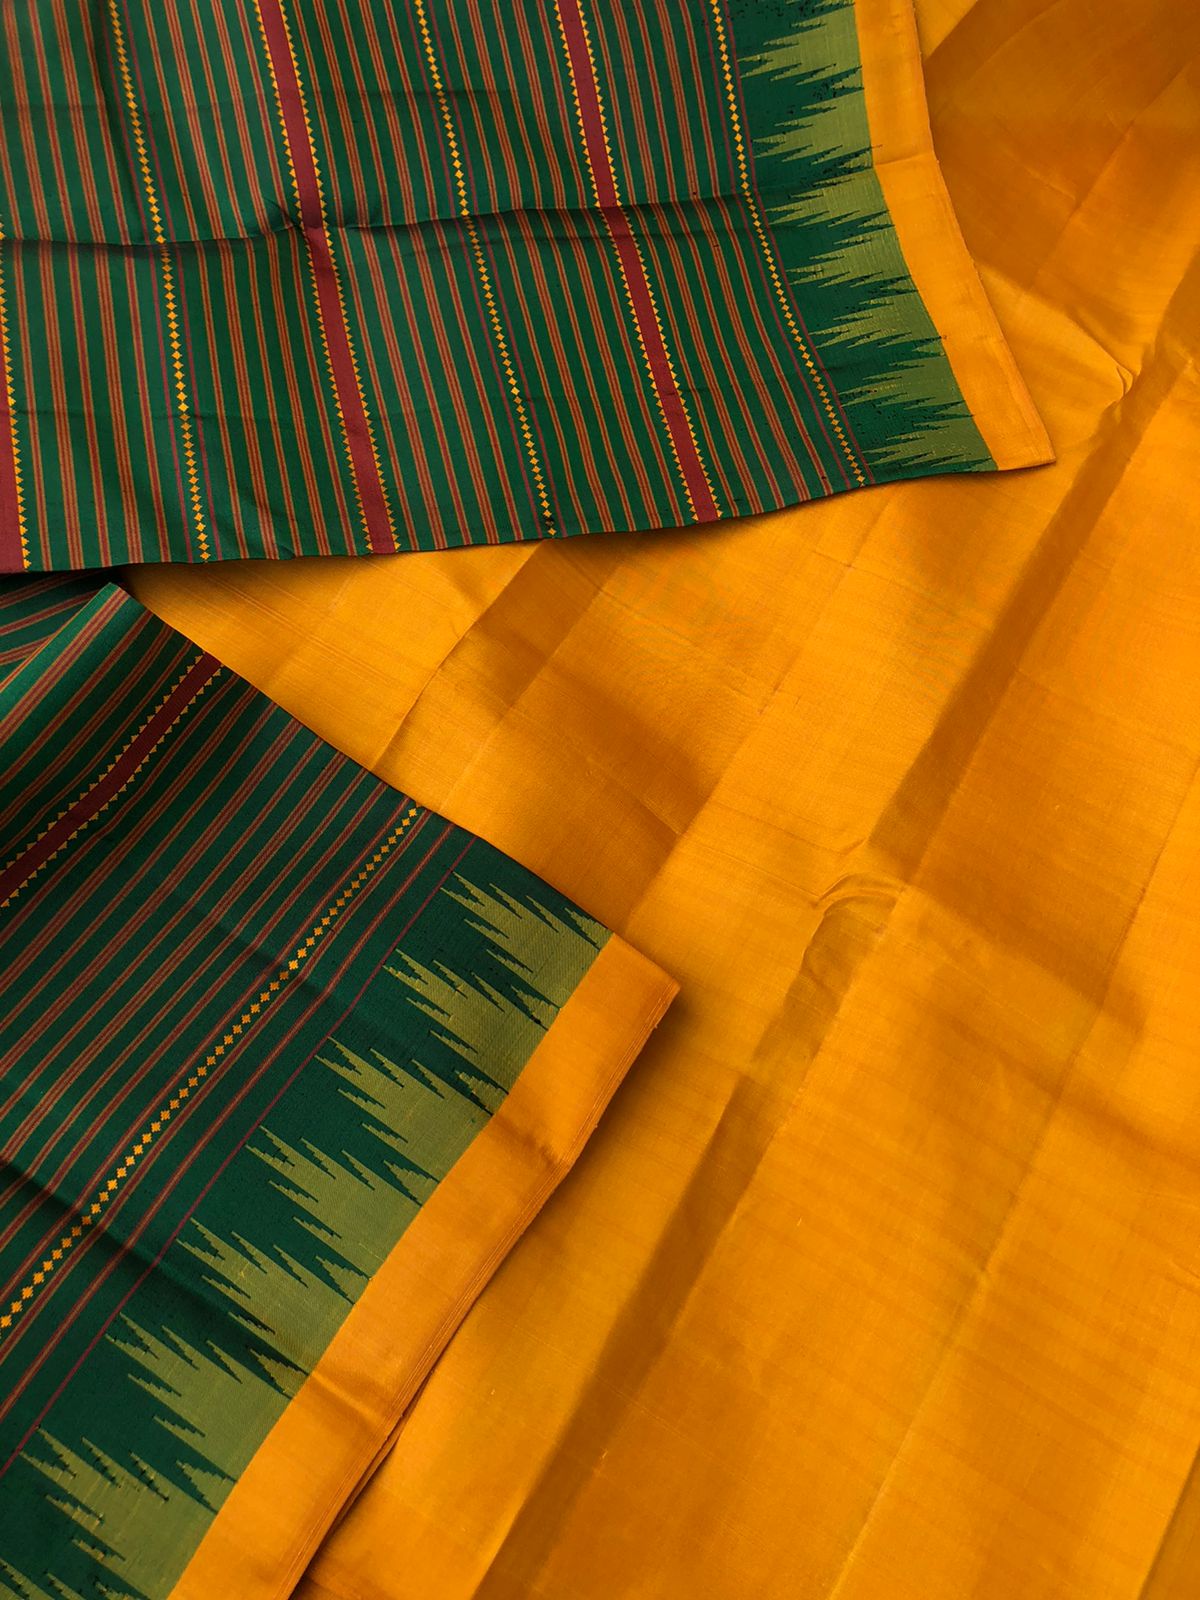 Festive Vibes on Korvai Kanchivaram - absolutely traditional deepest dark Meenakshi green and mustard muthu veldhari with small borders